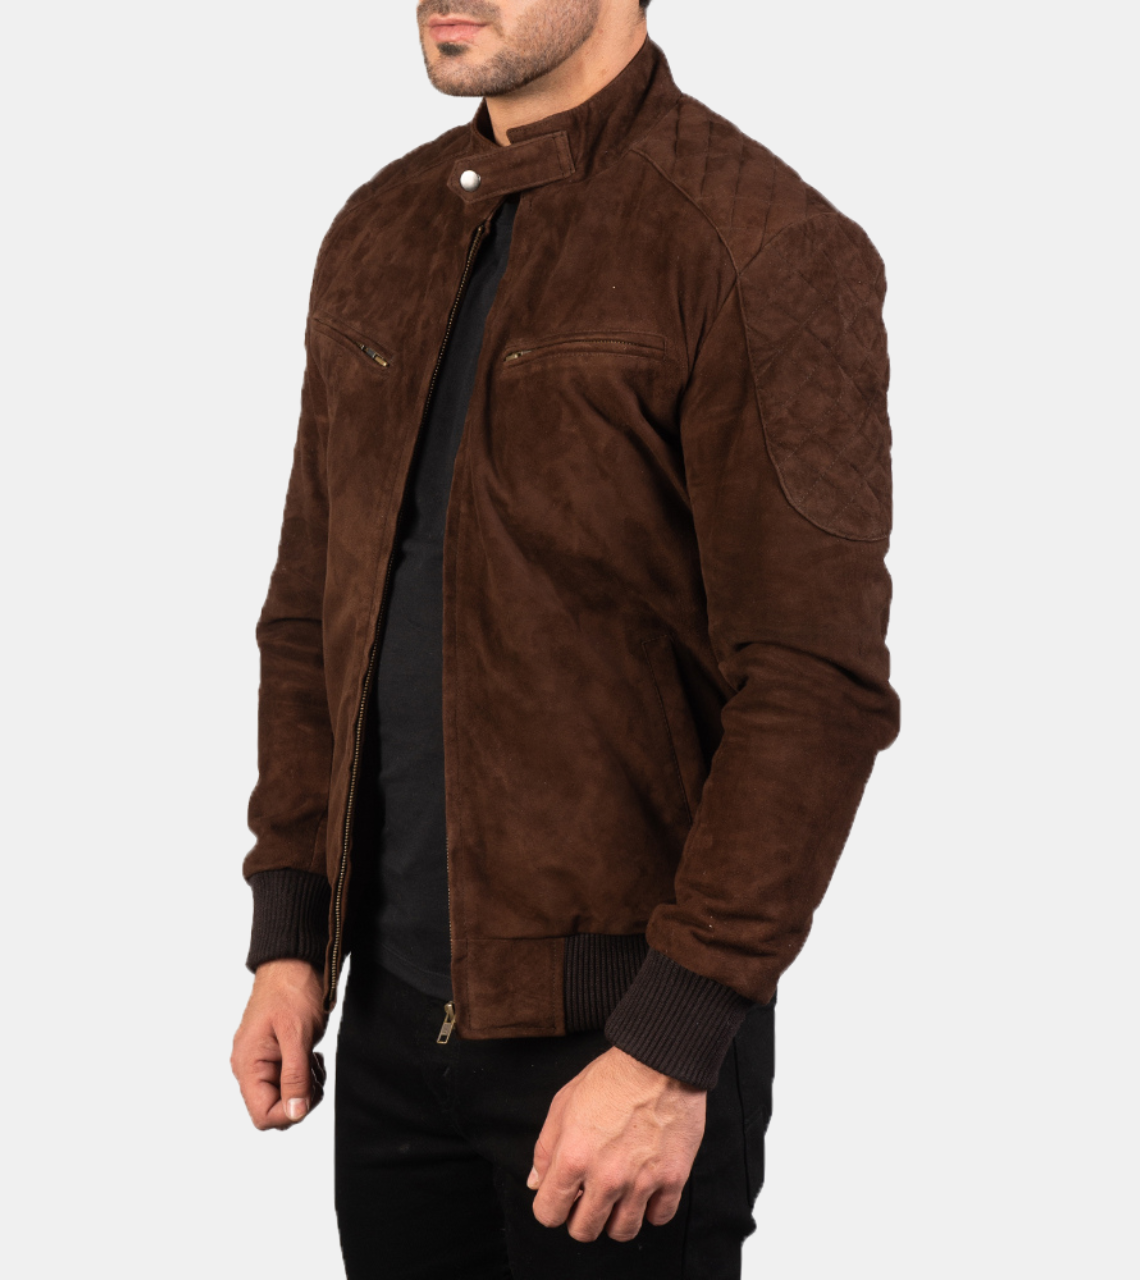  Brown Bomber Suede Leather Jacket